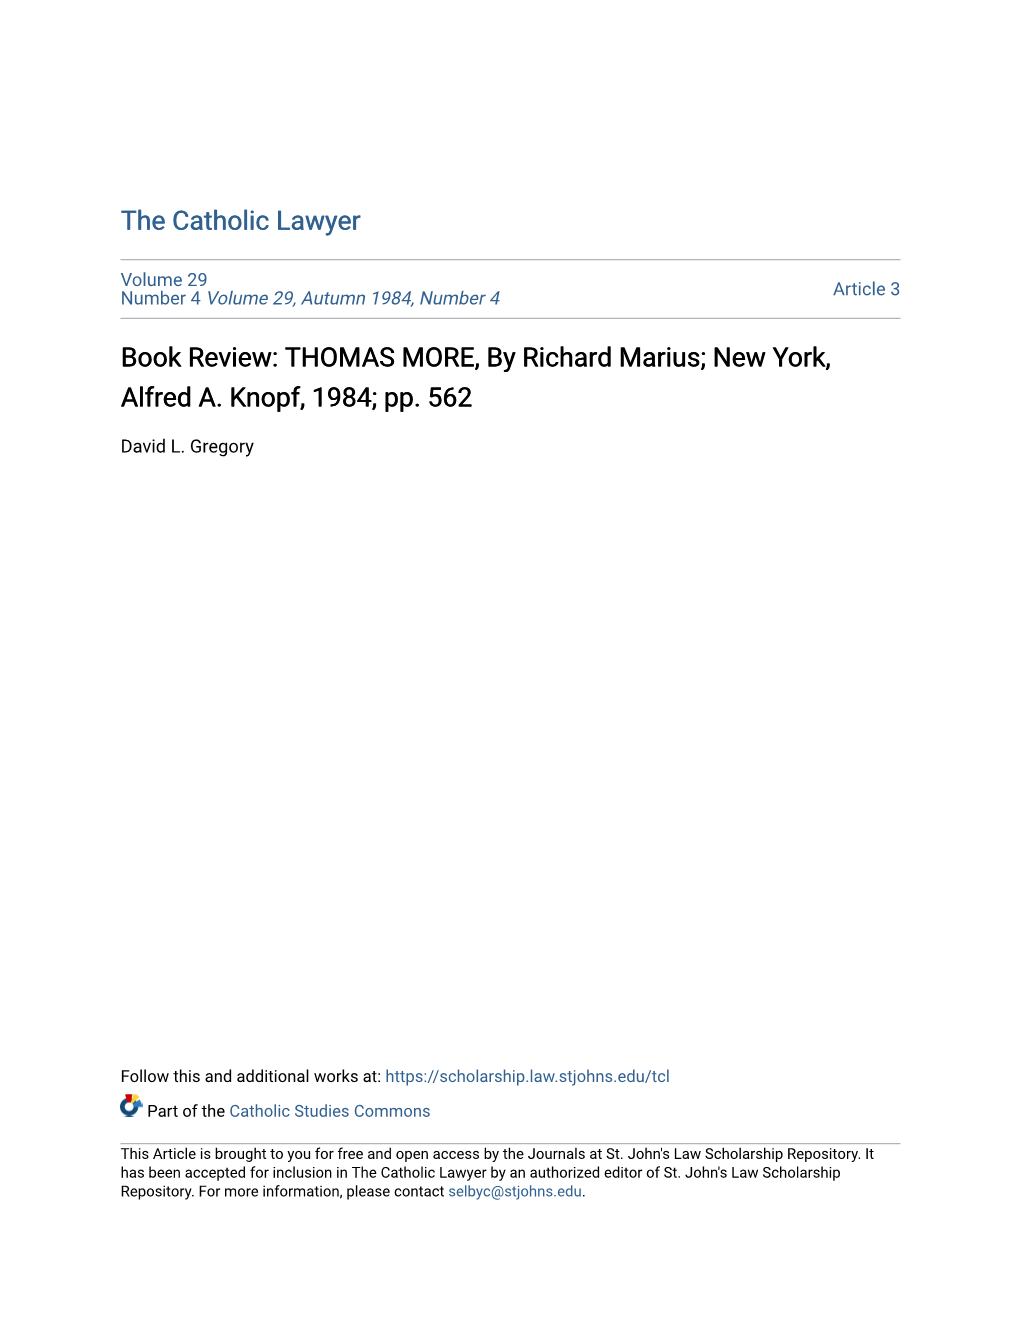 THOMAS MORE, by Richard Marius; New York, Alfred A. Knopf, 1984; Pp